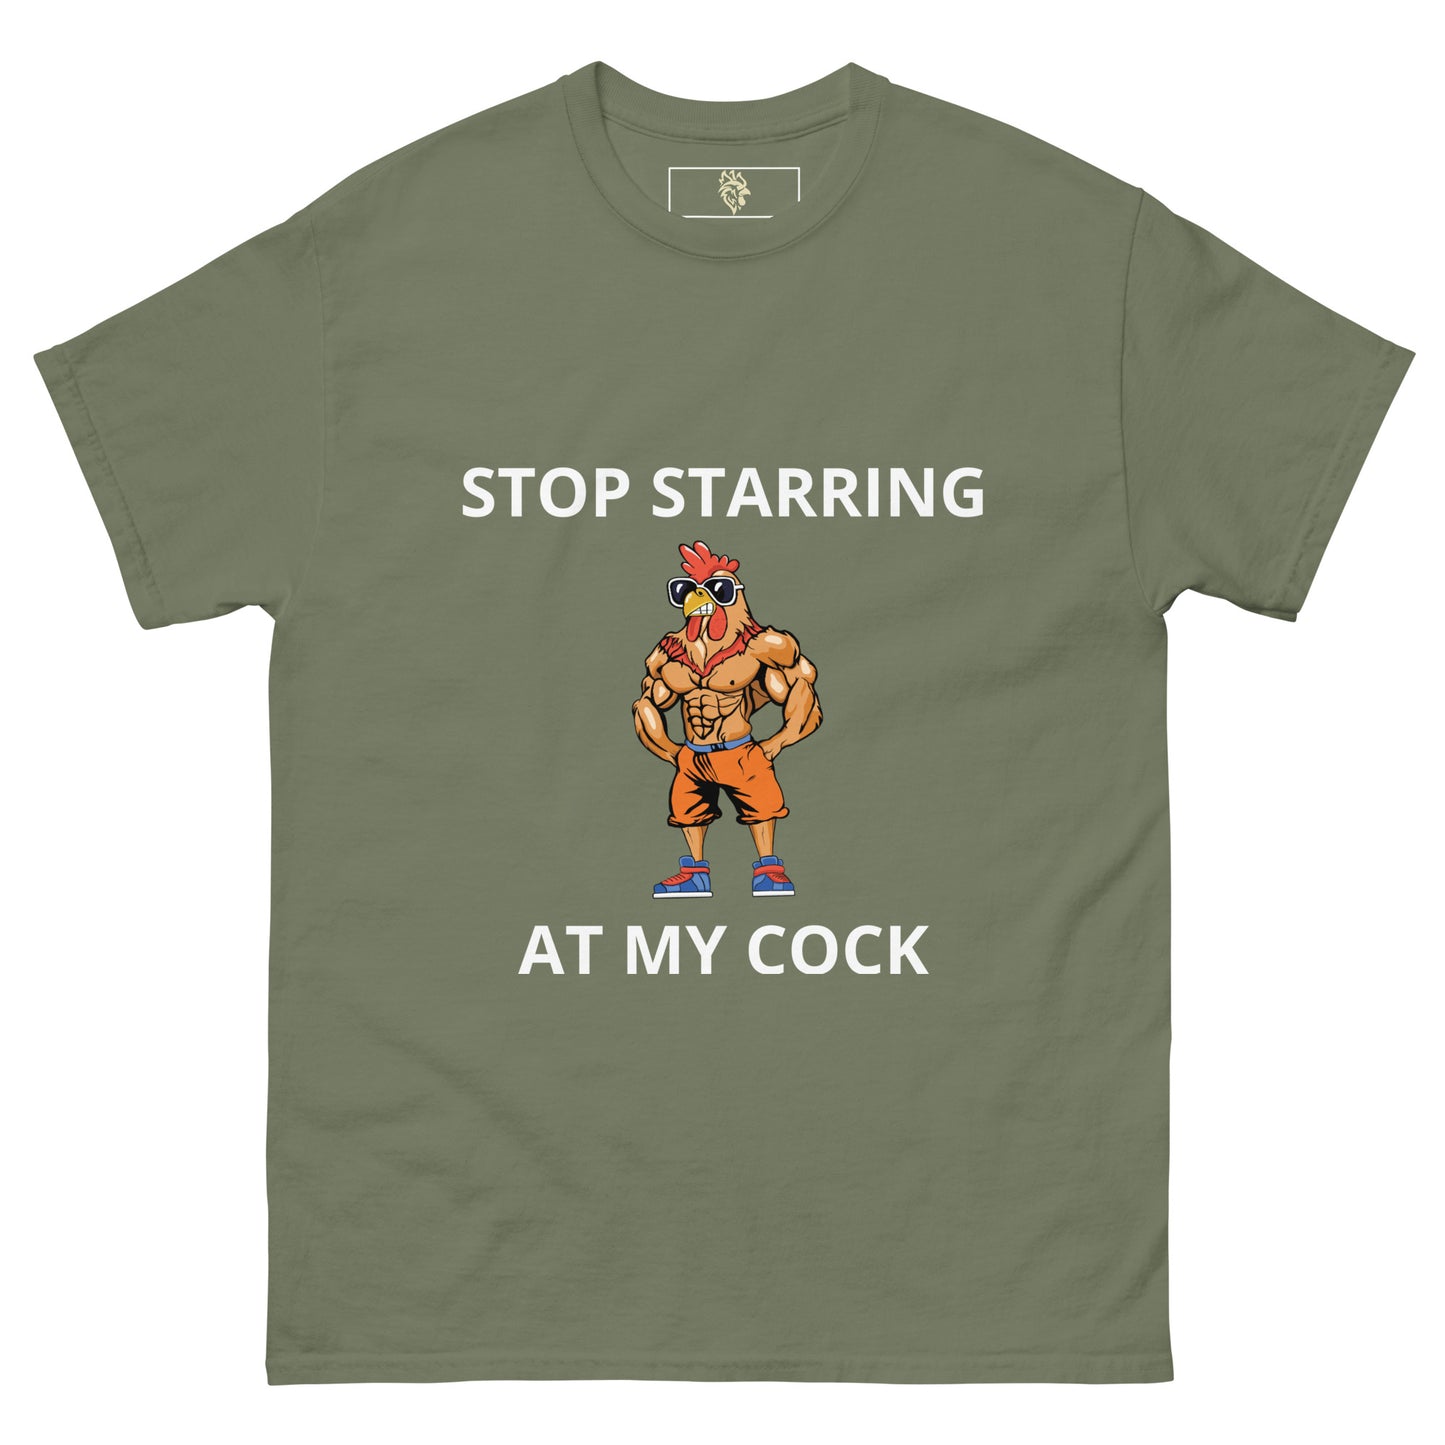 Stop starring at my cock - Tee